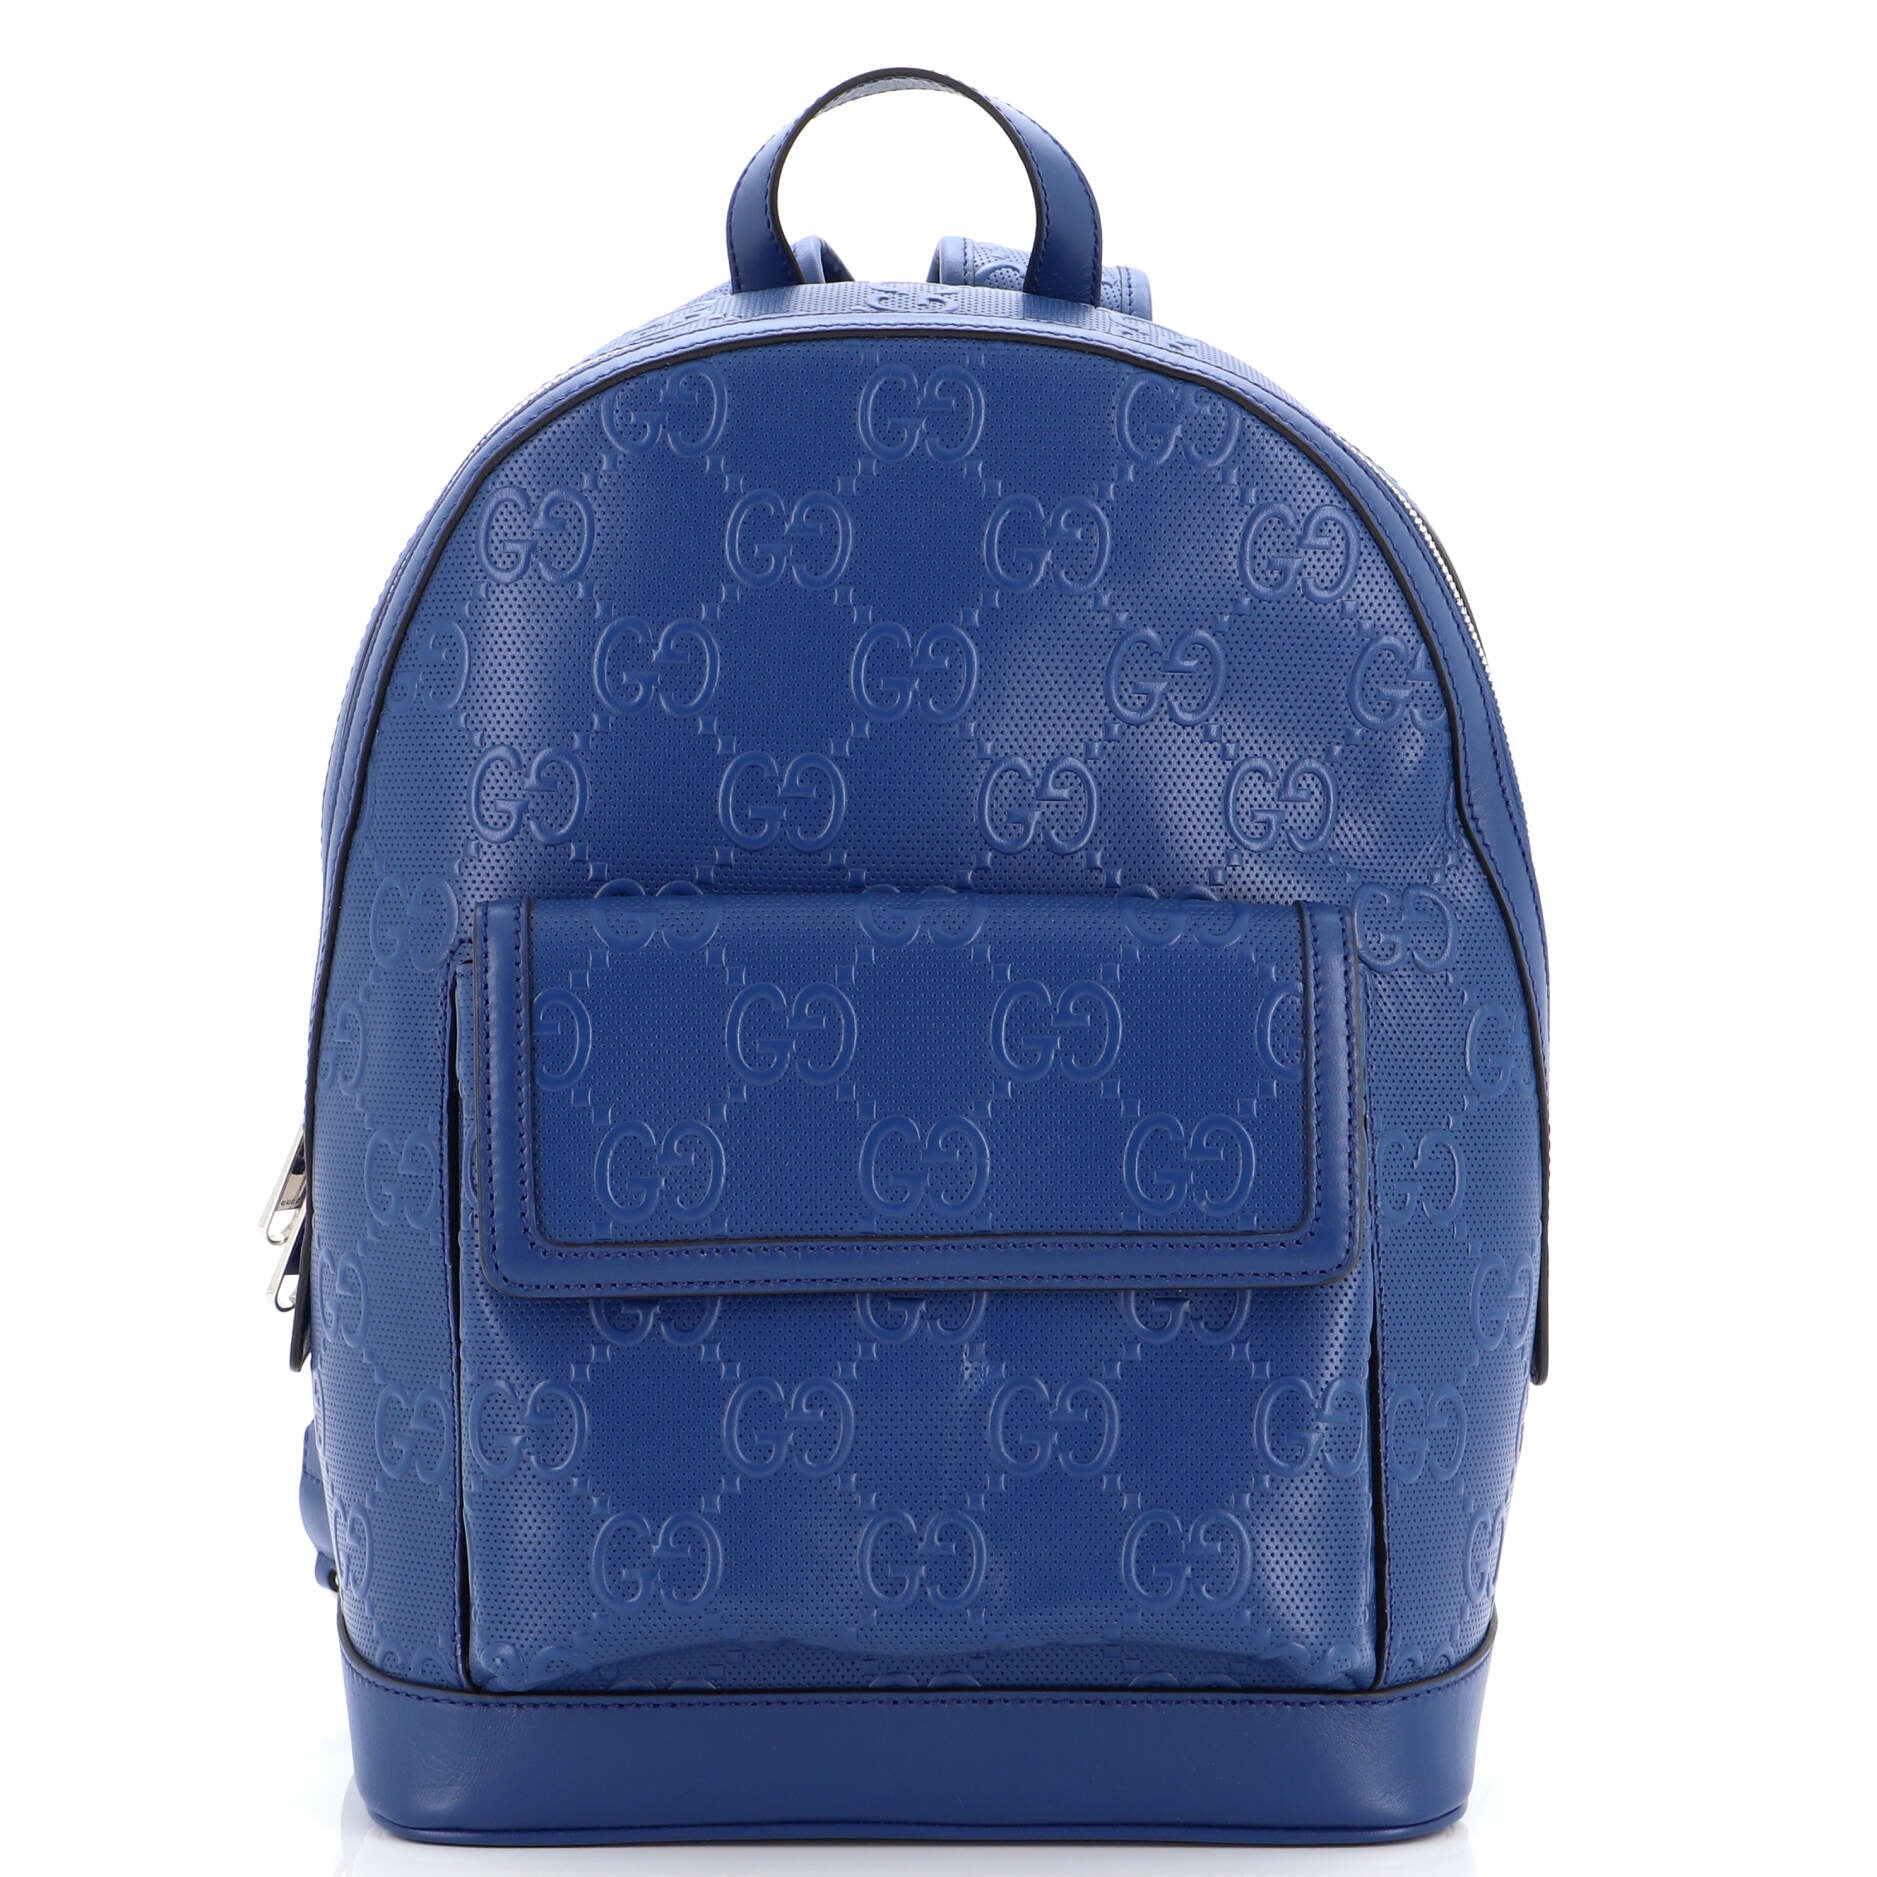 Pocket Backpack GG Embossed Perforated Leather Large